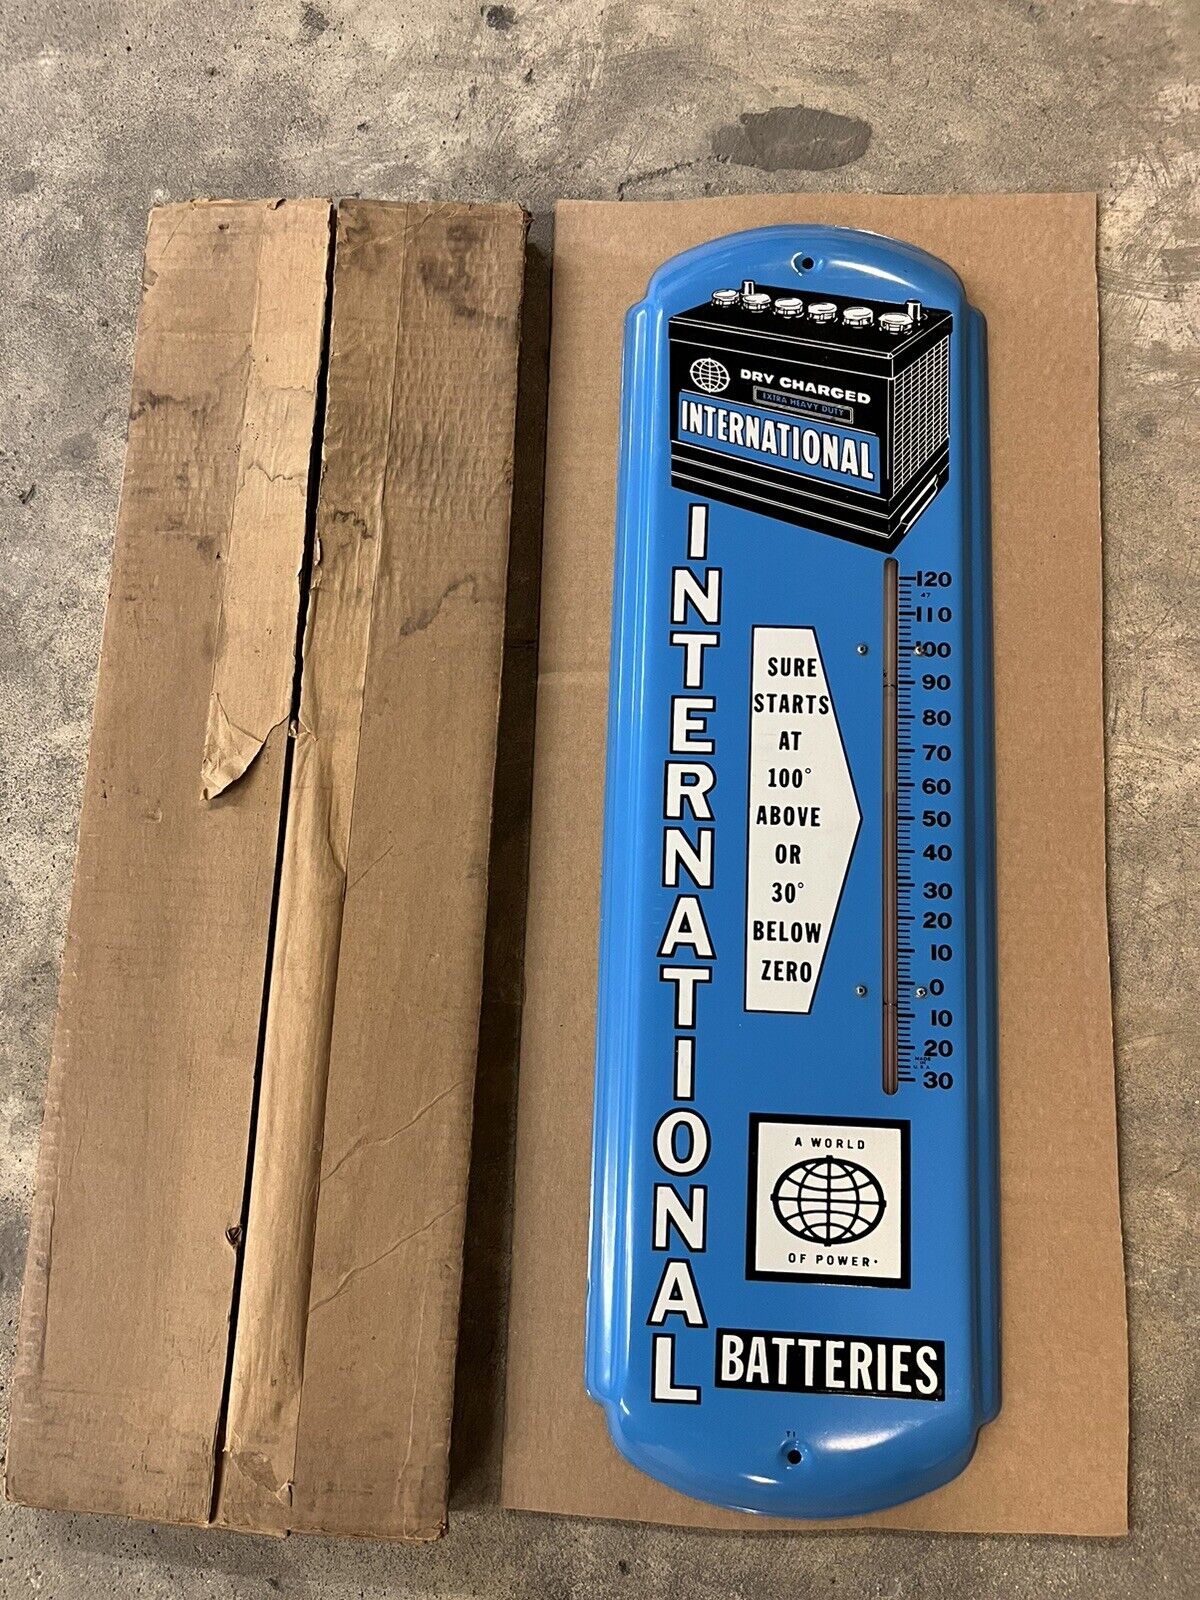 Original NOS International Batteries Thermometer Gas Oil Tires Sign